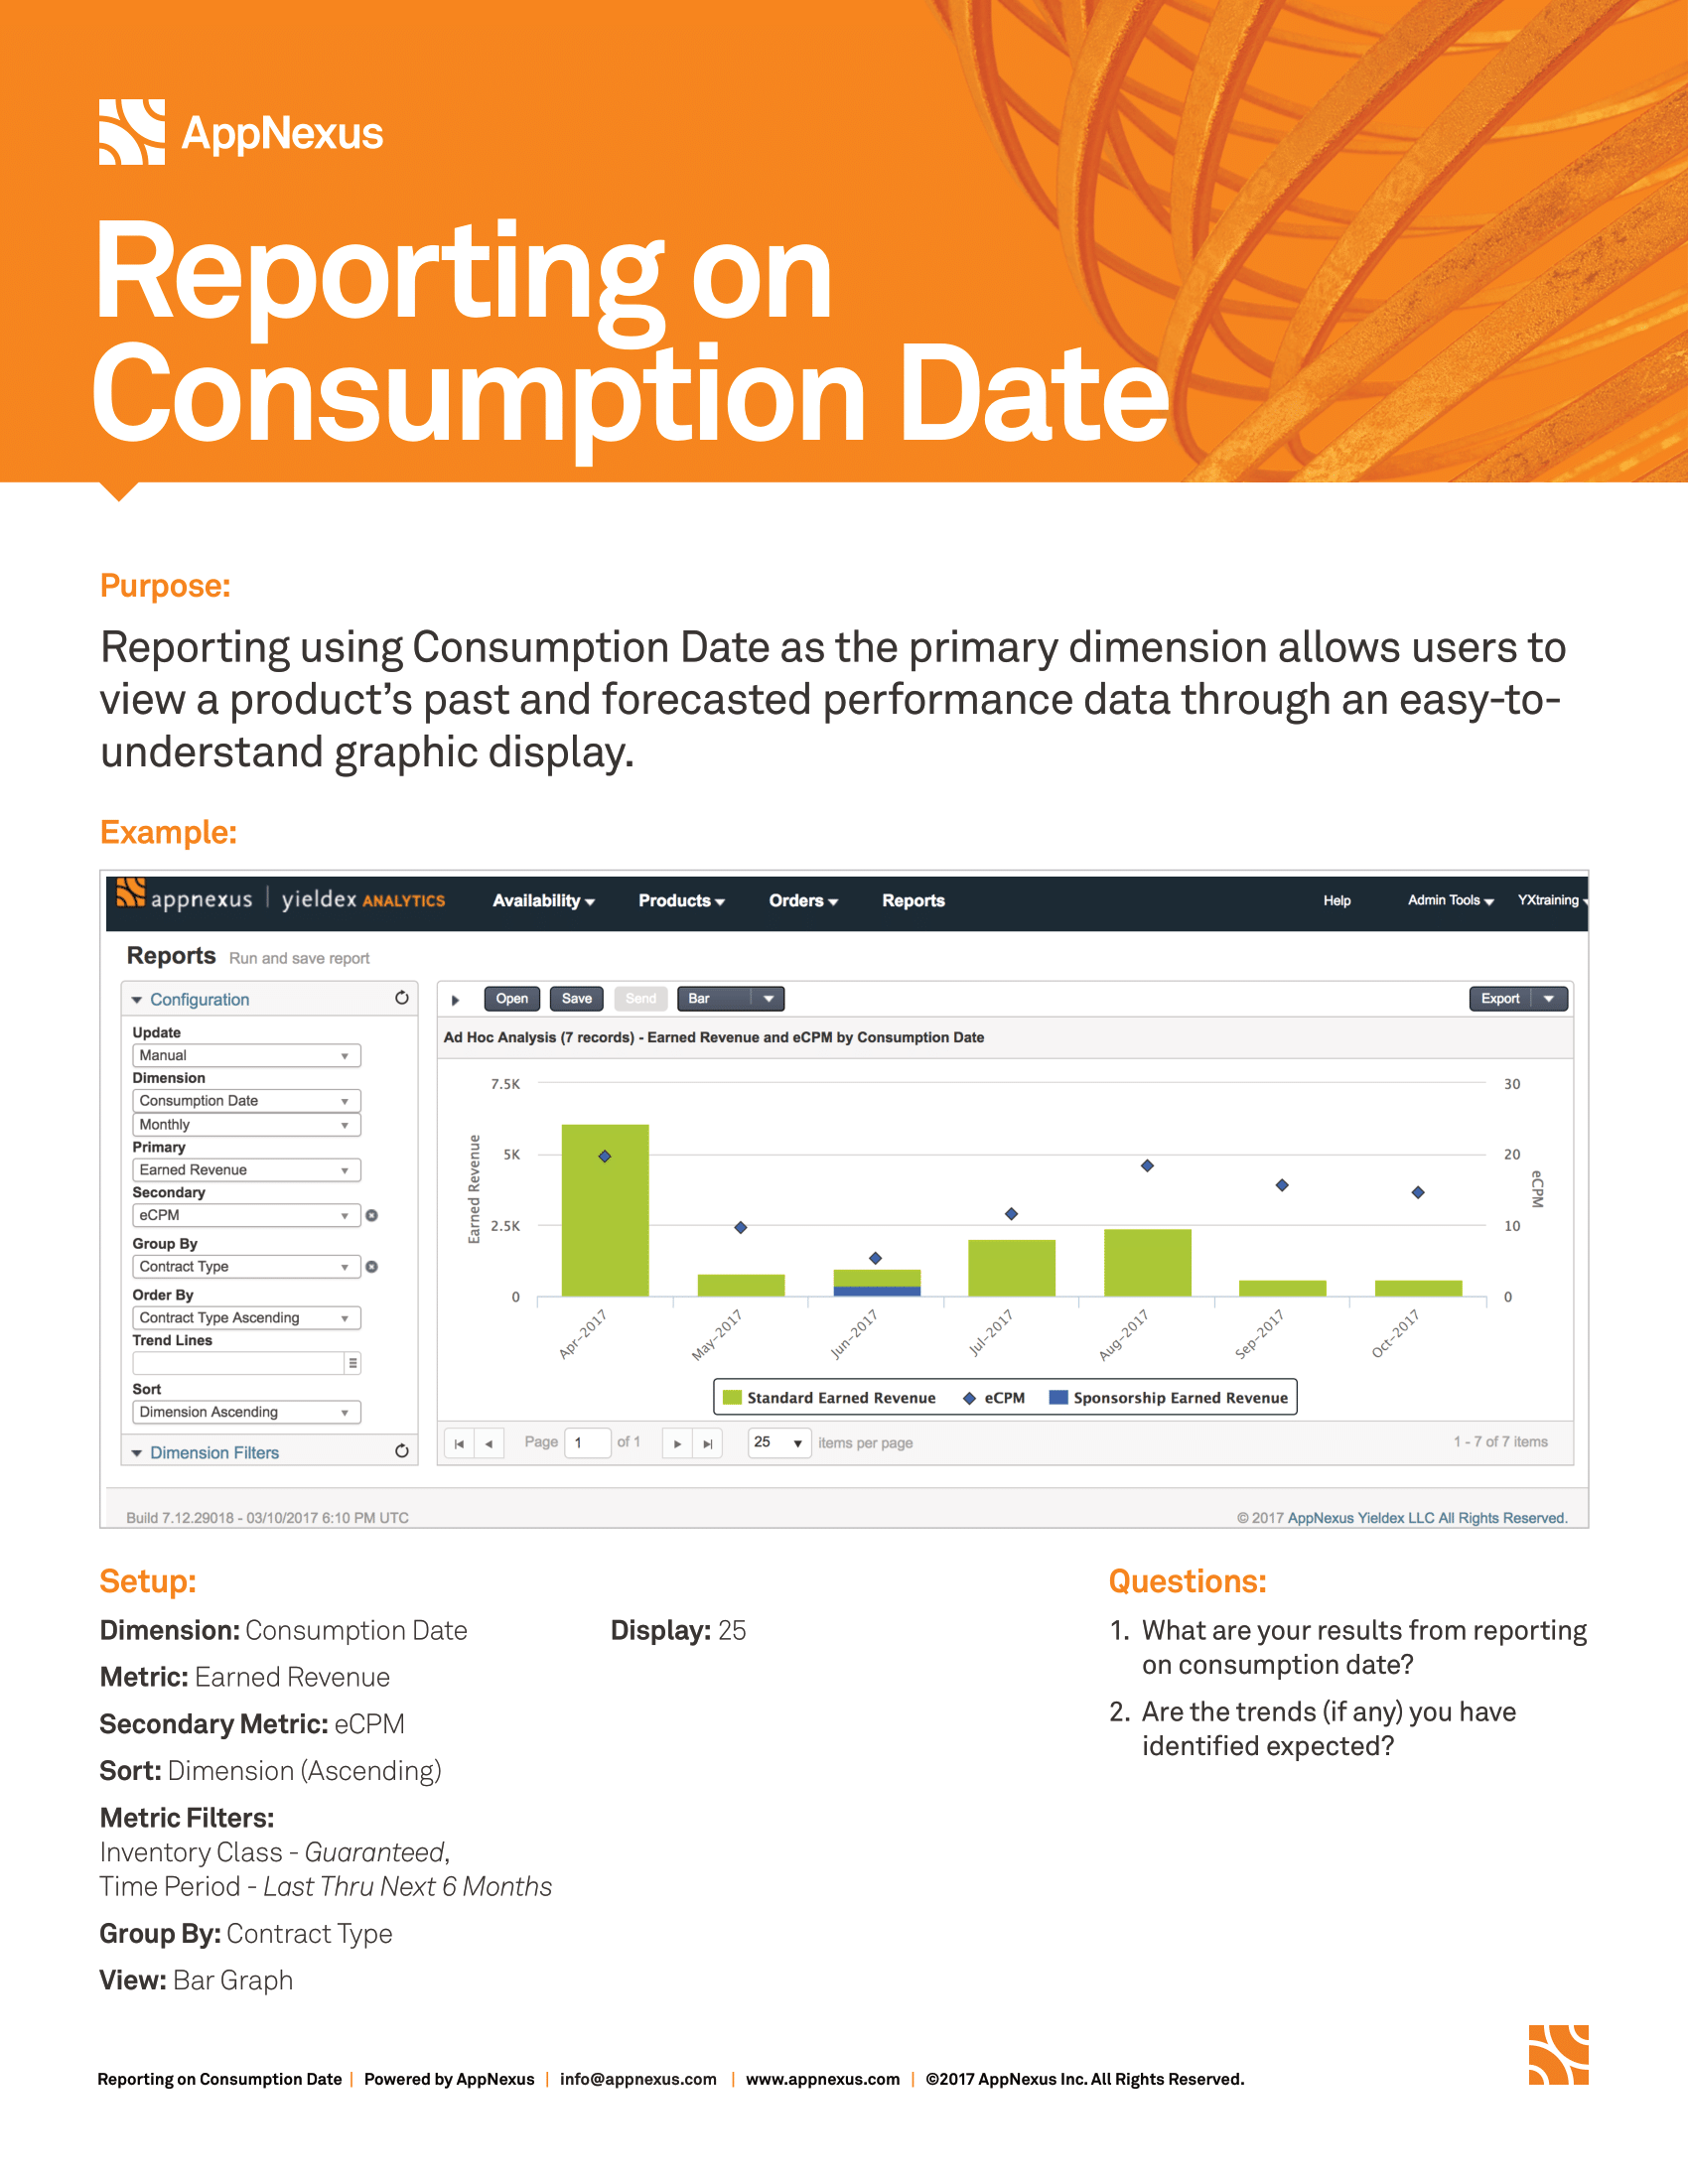 Screenshot that provides details about the Reporting on Consumption Date report.